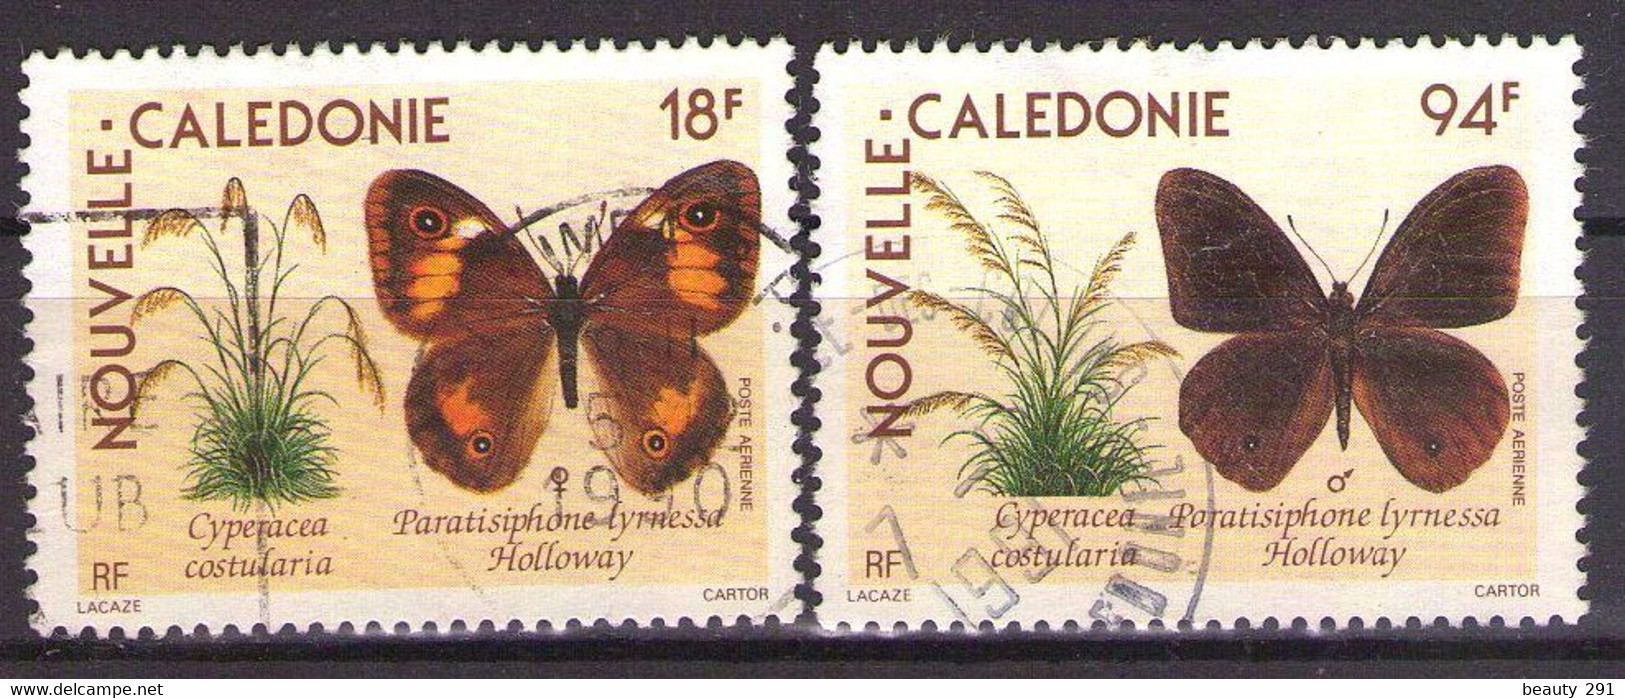 NOUVELLE CALEDONIE - POSTE AERIENNE  1990  Mi 868-869  USED - Used Stamps